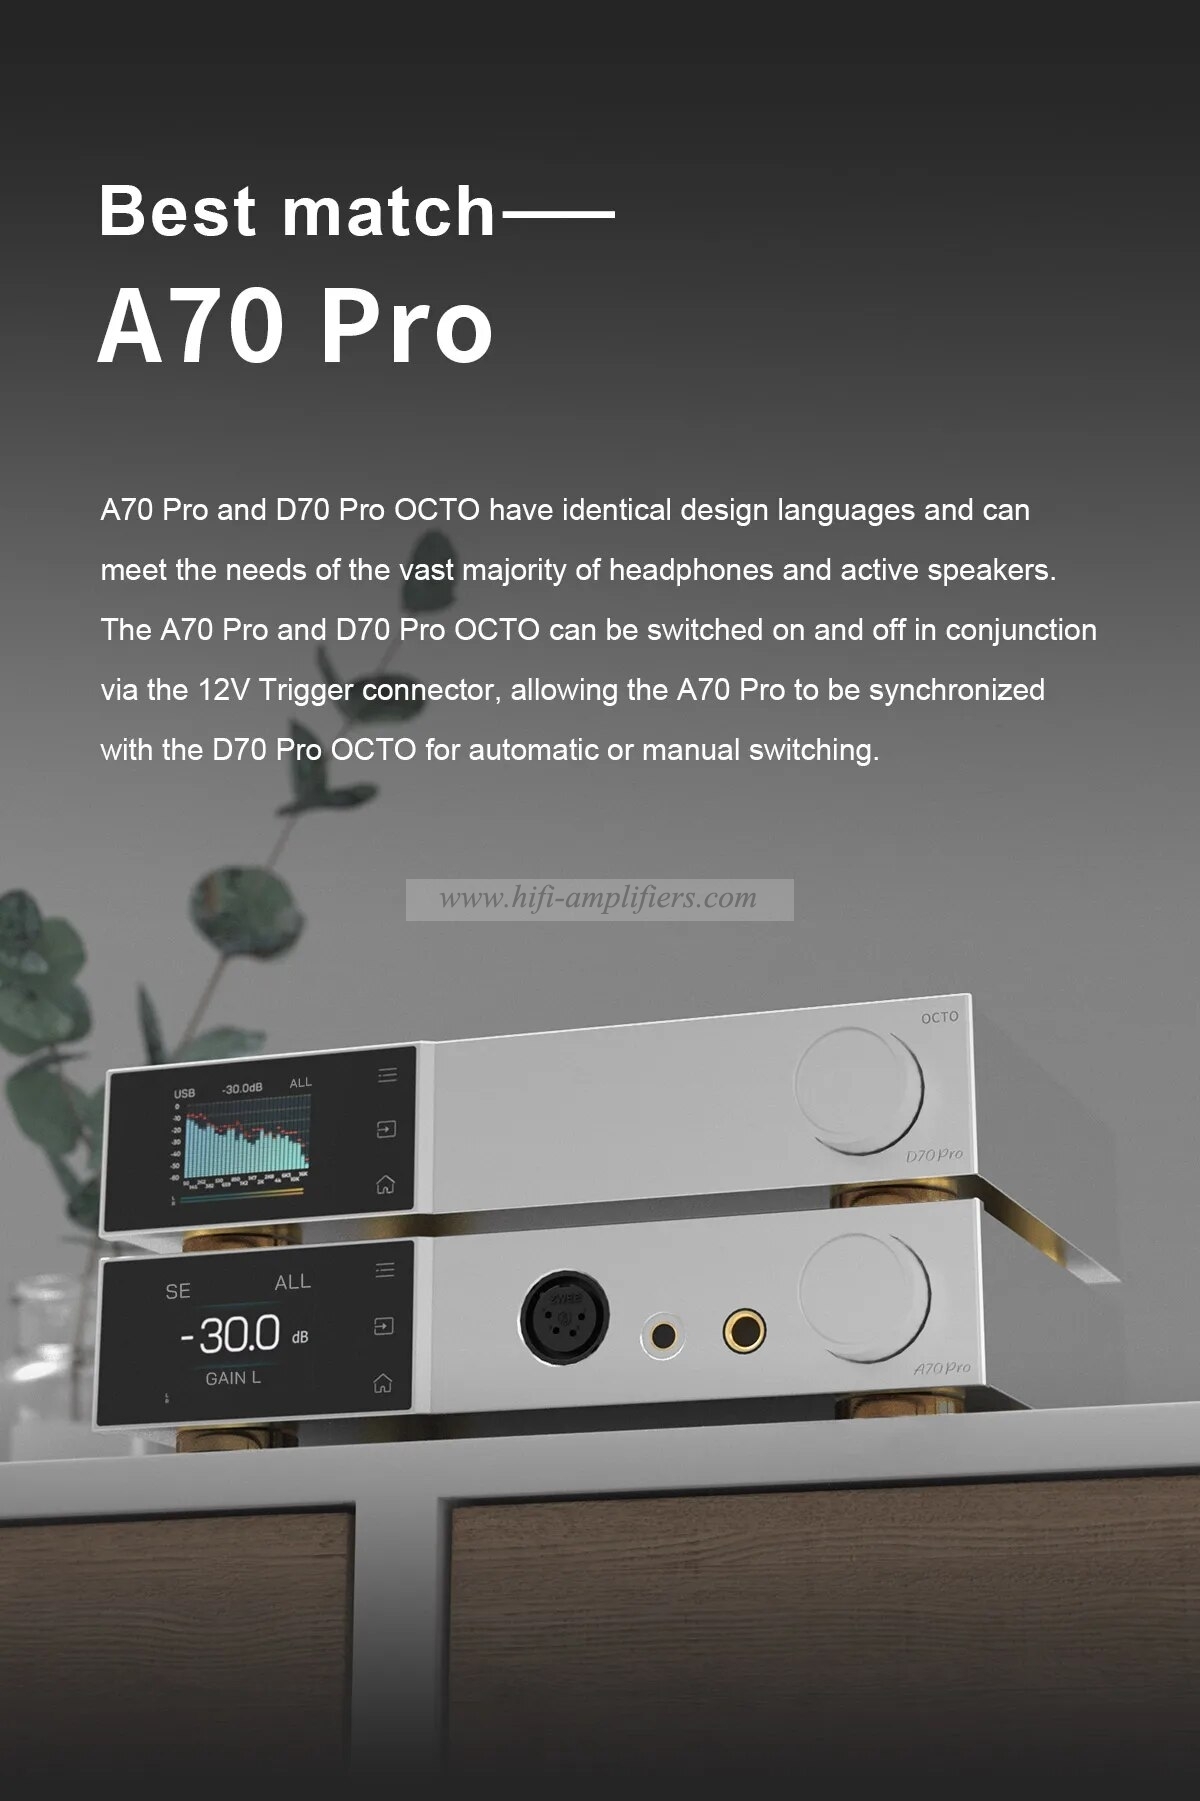 TOPPING D70Pro OCTO Digital Audio Decoder Chip CS43198*8 Eight Support DSD512 Bluetooth Computer USB Sound Card Fully Balanced